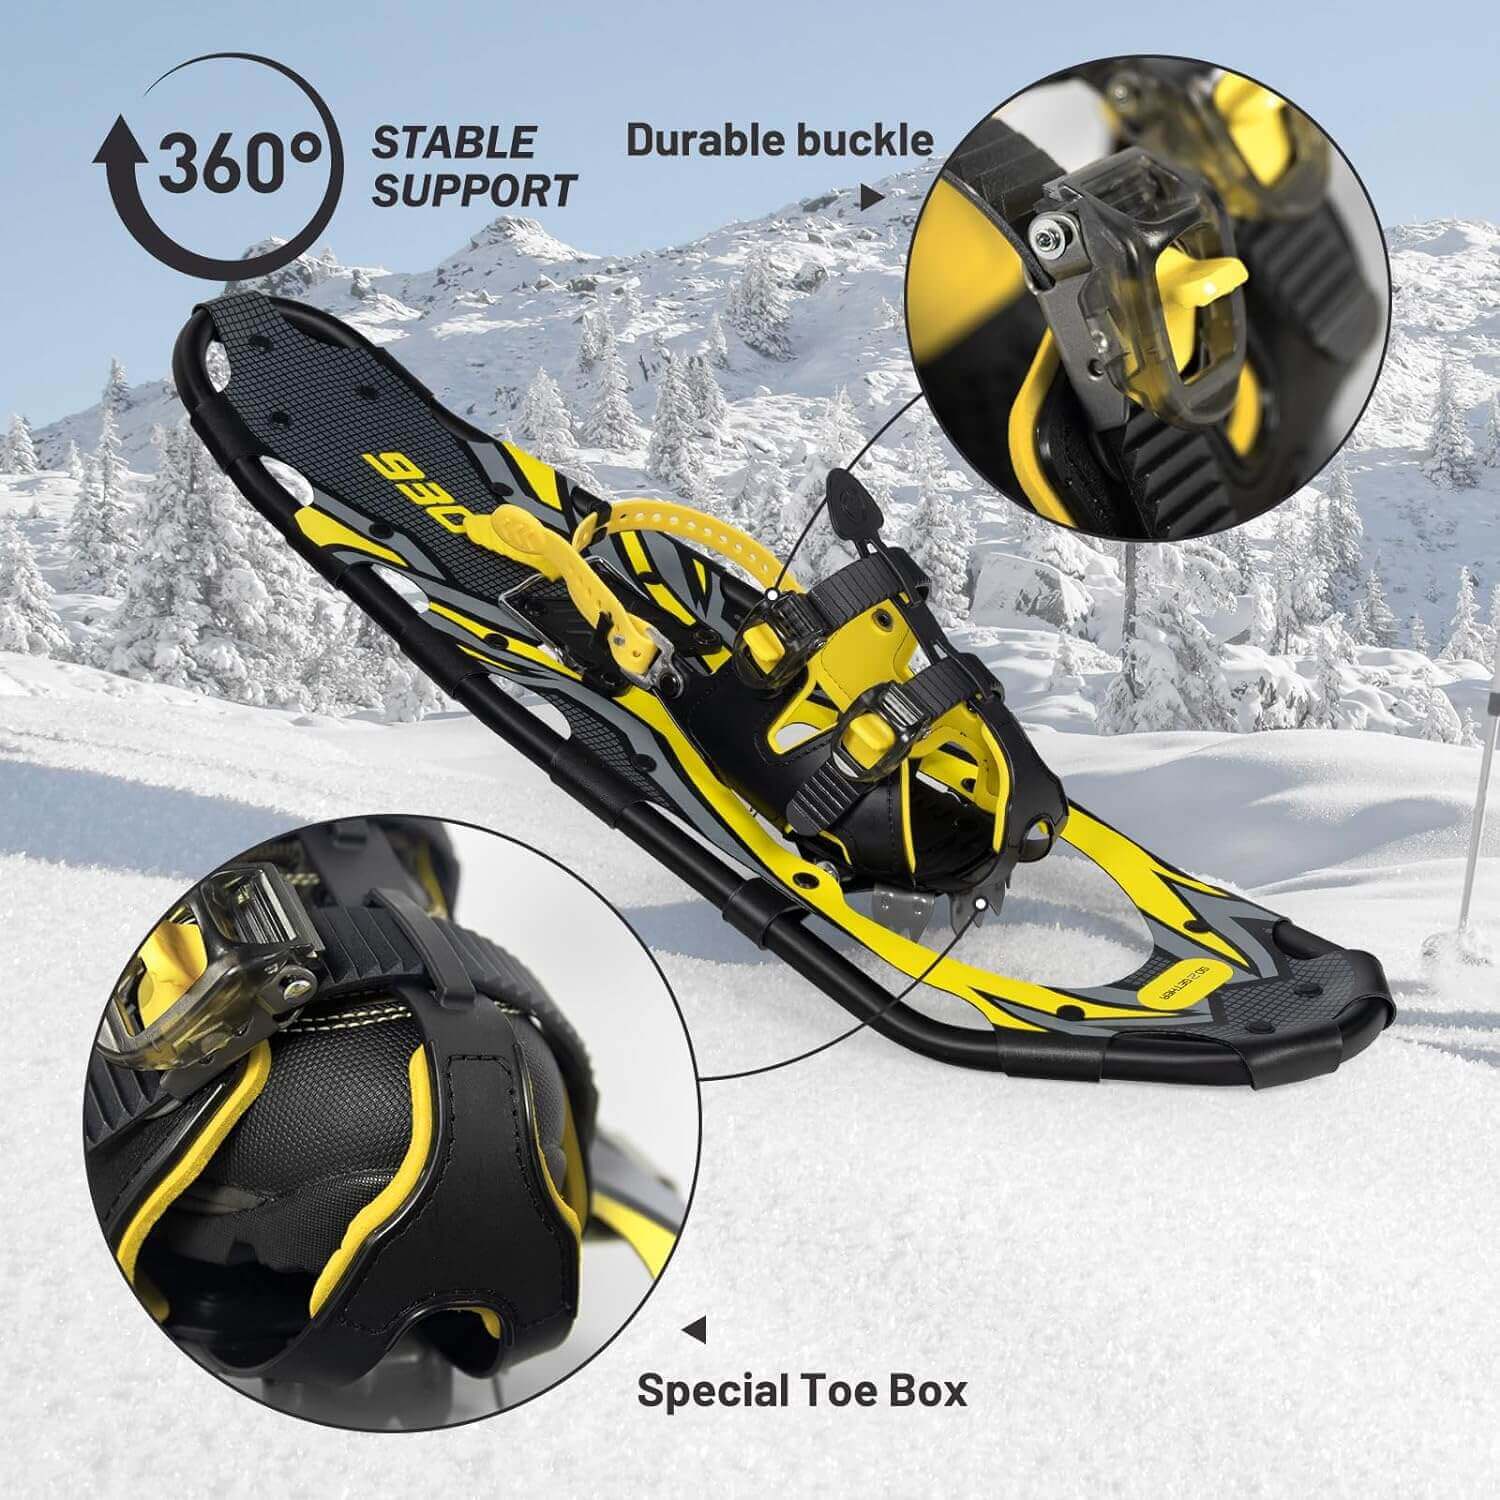 Shop The Latest >G2 Light Weight Snowshoes with Trekking Poles & Carrying Bag > *Only $121.49*> From The Top Brand > *G2 GO2GETHERl* > Shop Now and Get Free Shipping On Orders Over $45.00 >*Shop Earth Foot*